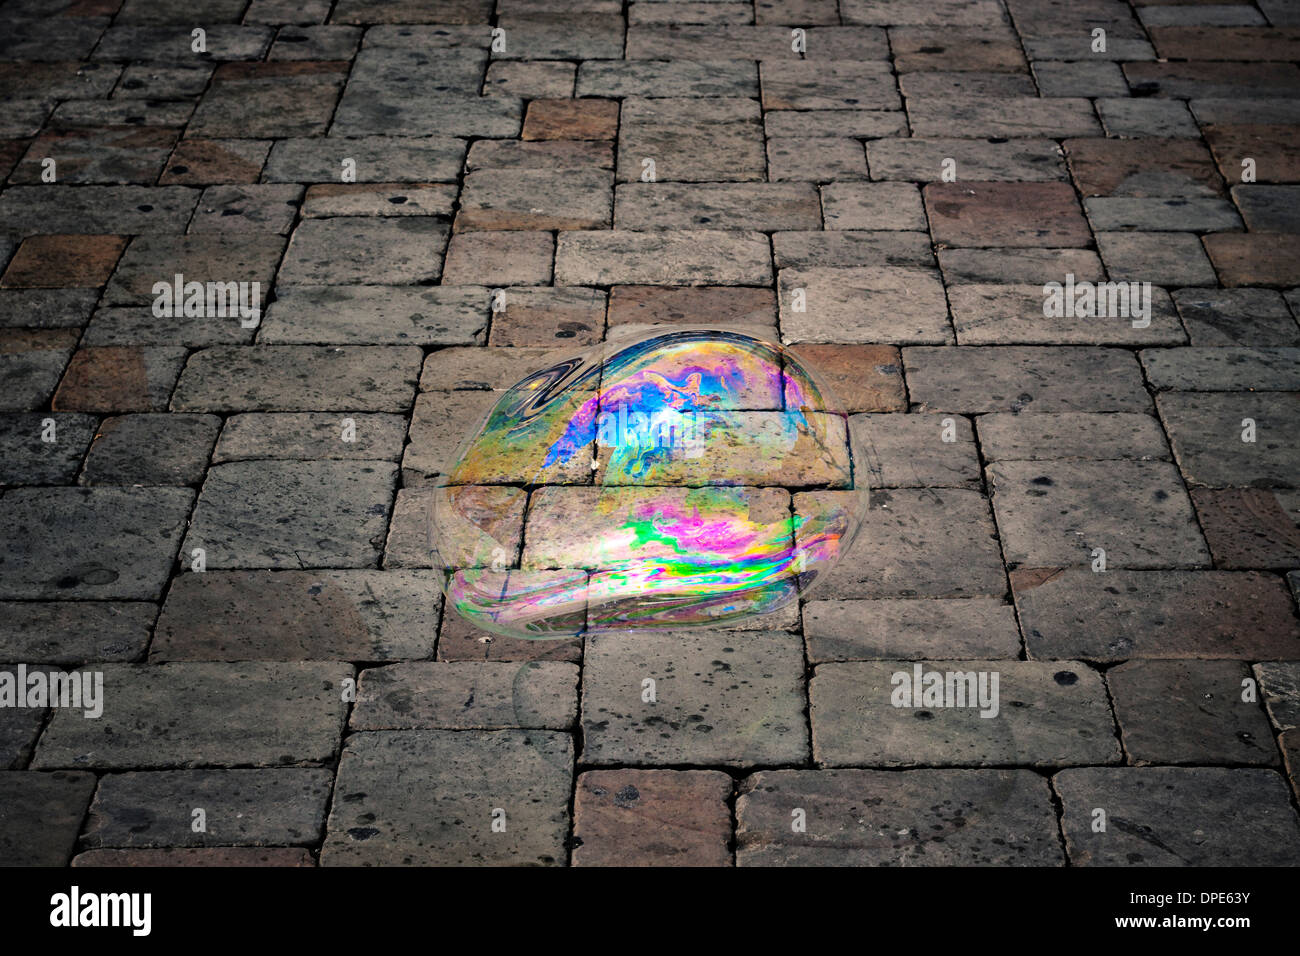 Abstract creative photo of large colorful soap bubble flying over dark pavement background. Stock Photo